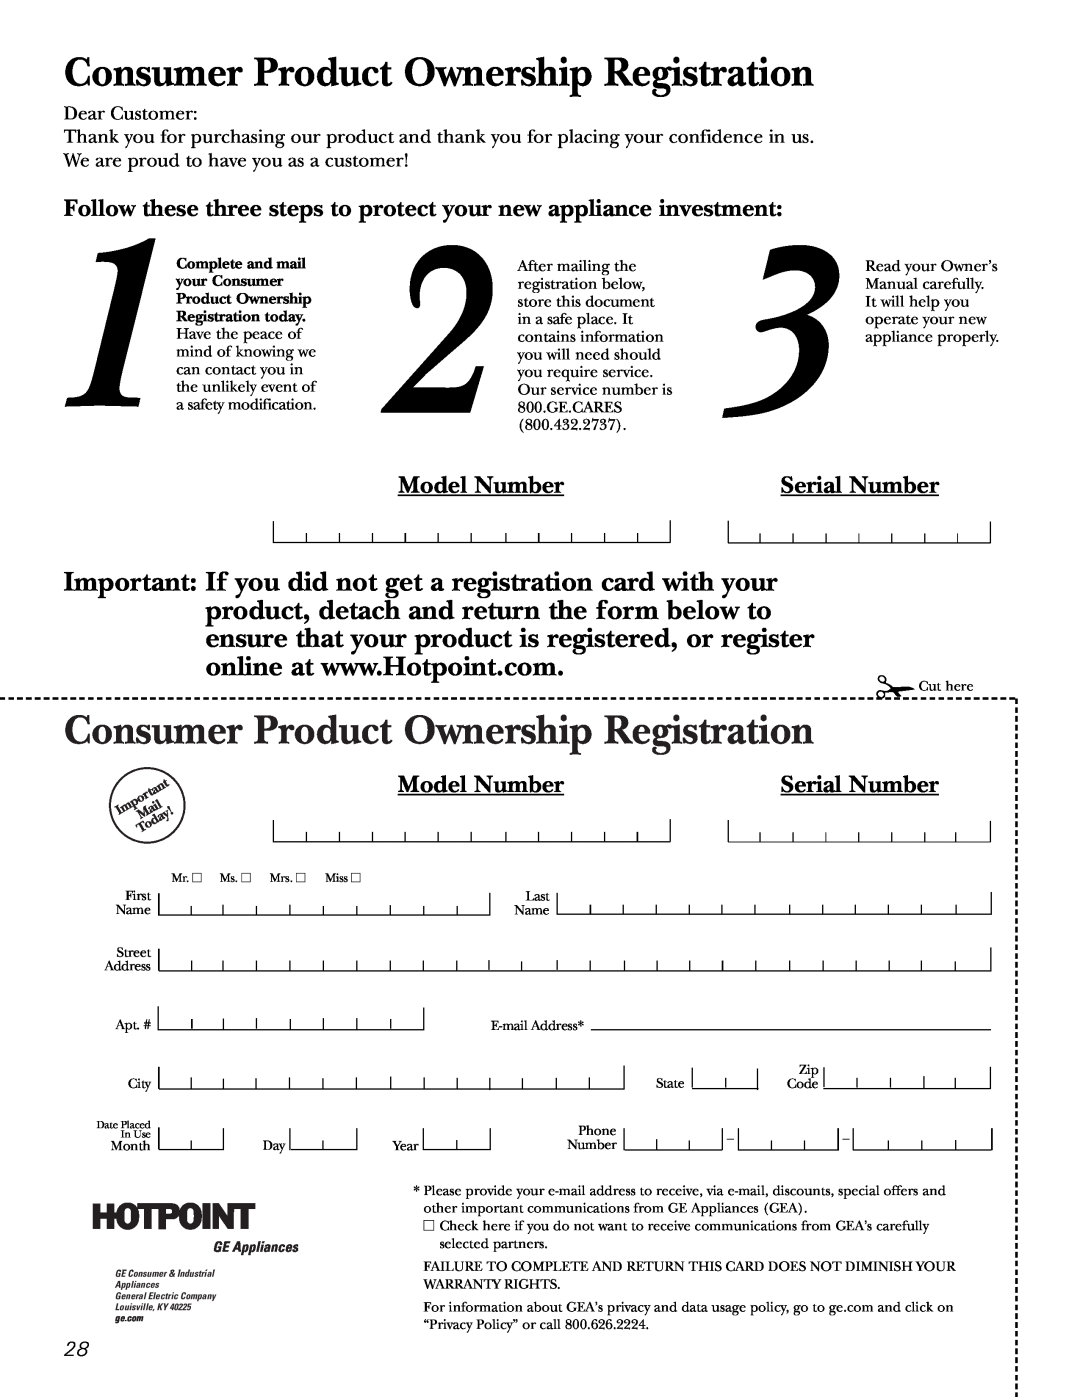 Hotpoint 19 Follow these three steps to protect your new appliance investment, Model Number, Serial Number, Dear Customer 